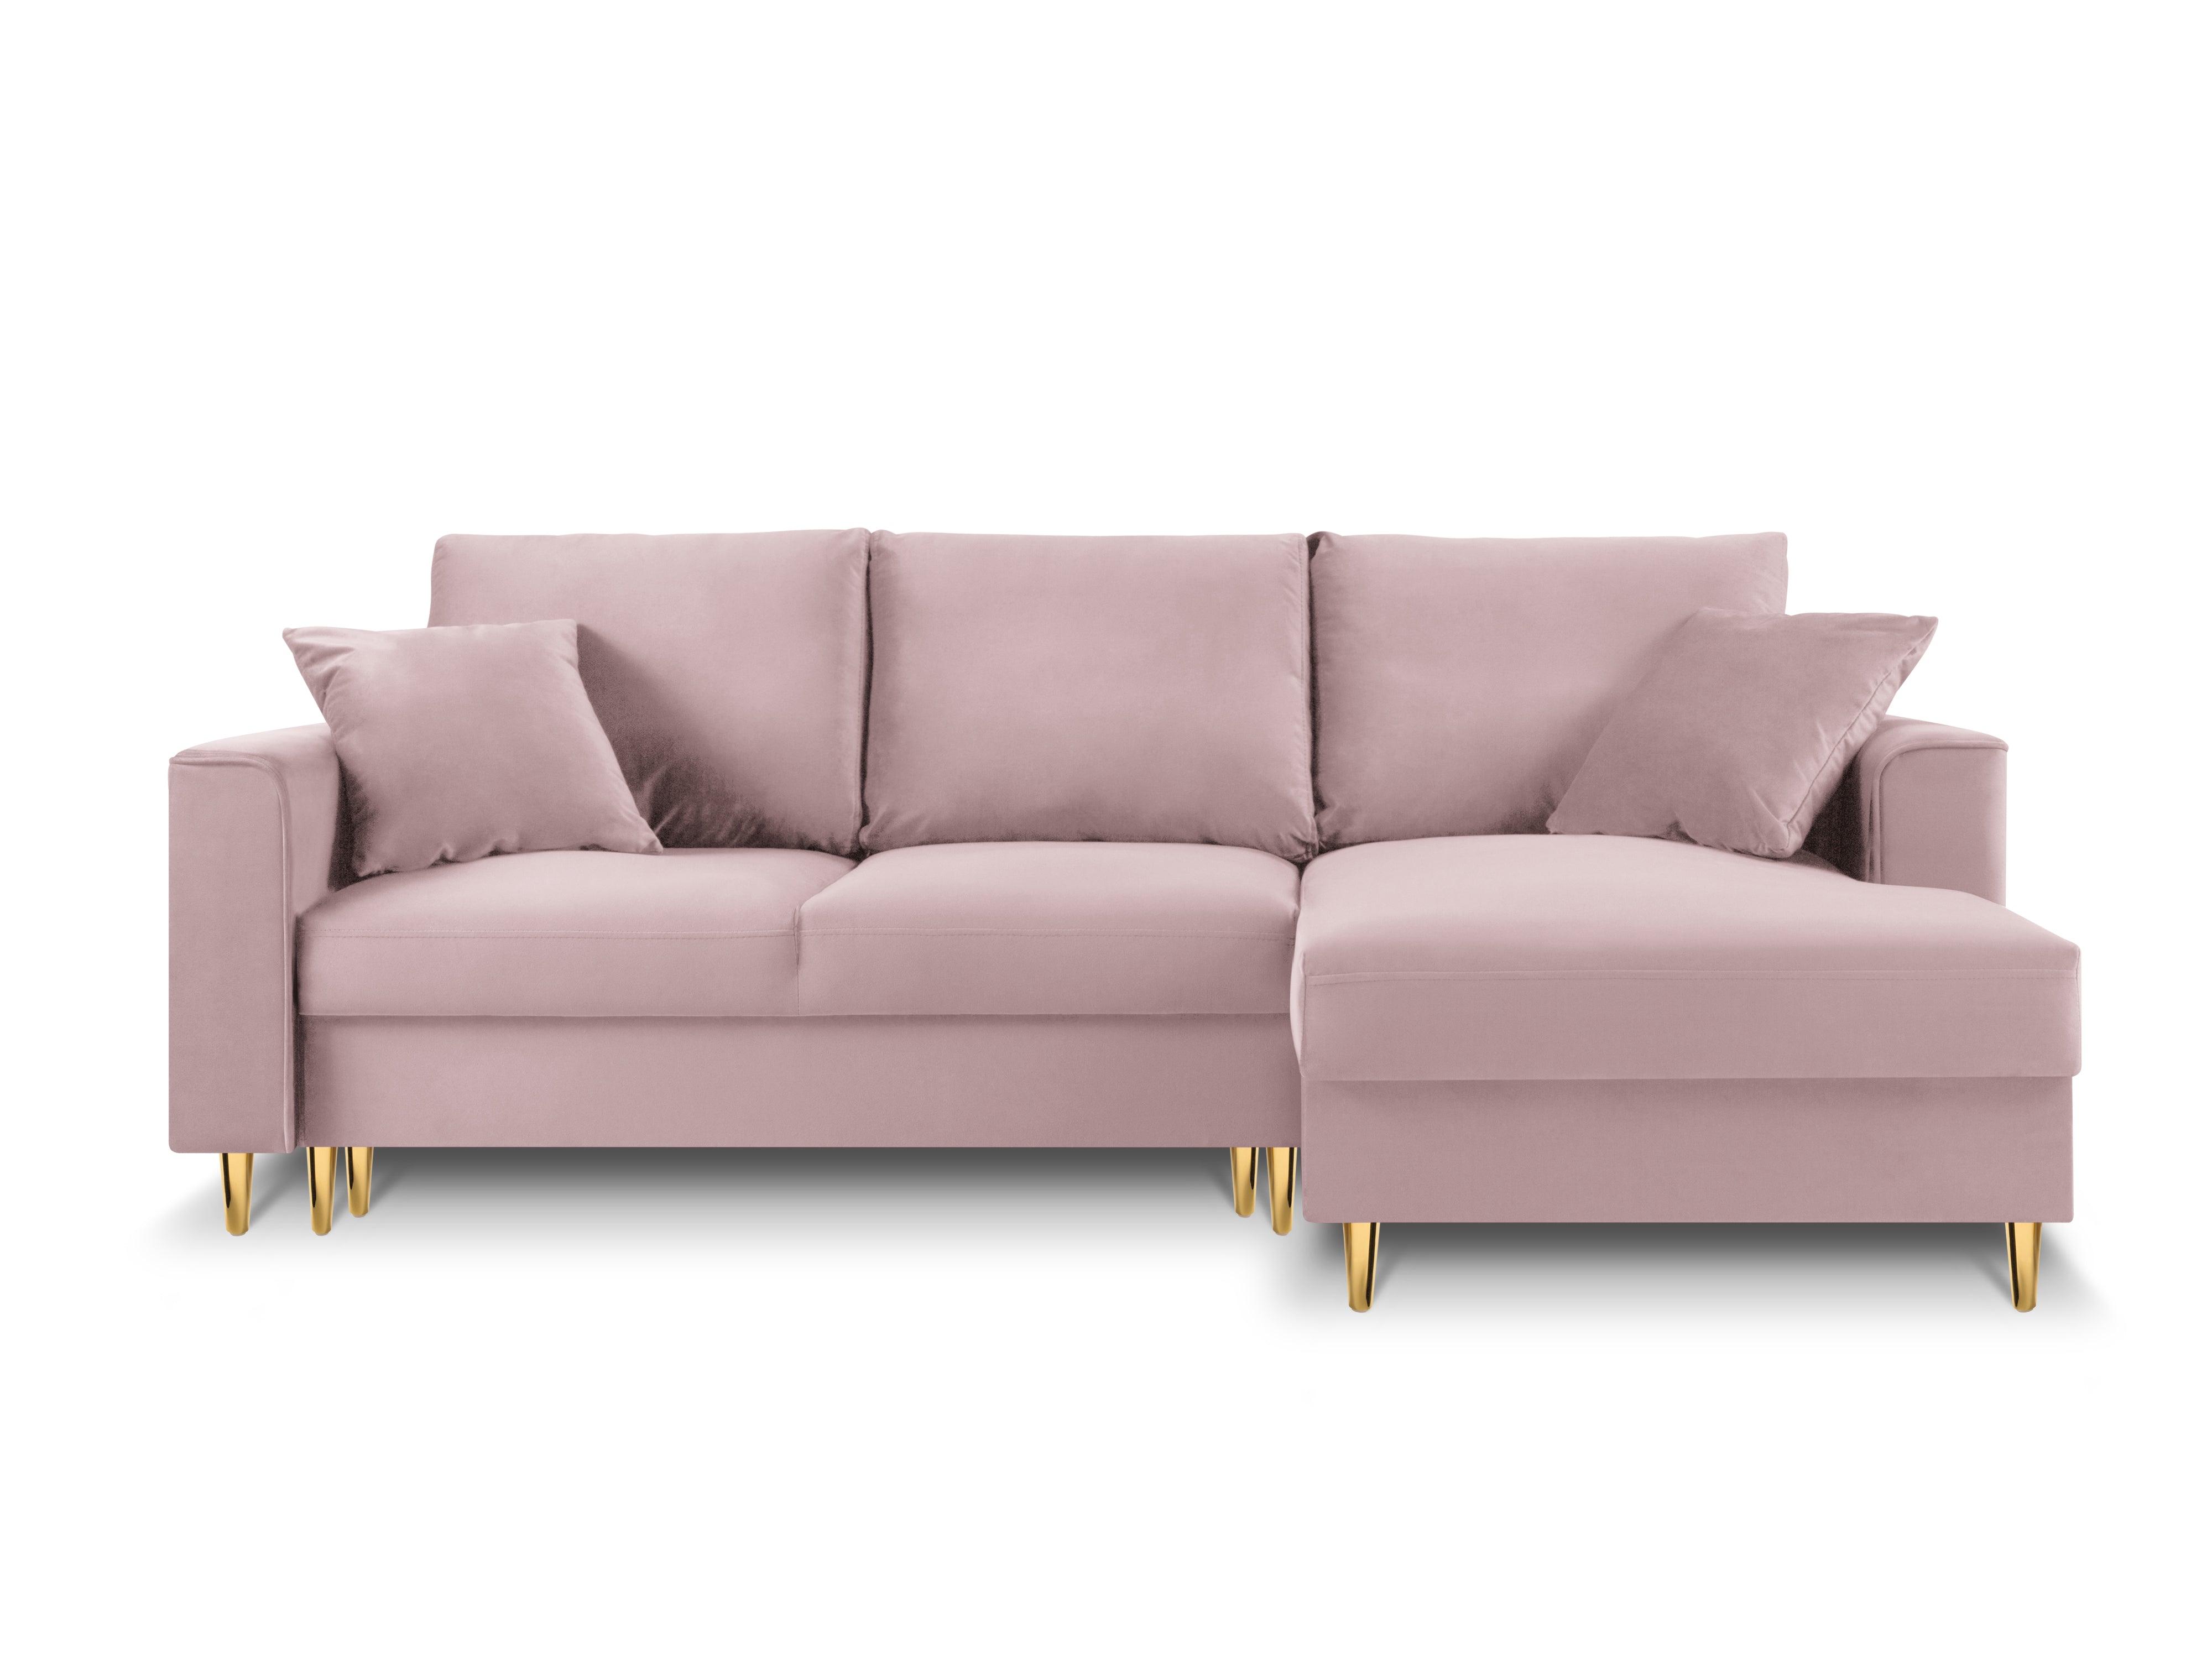 Velvet Right Corner Sofa With Bed Function And Box, "Cartadera", 4 Seats, 225x147x90
Made in Europe, Mazzini Sofas, Eye on Design